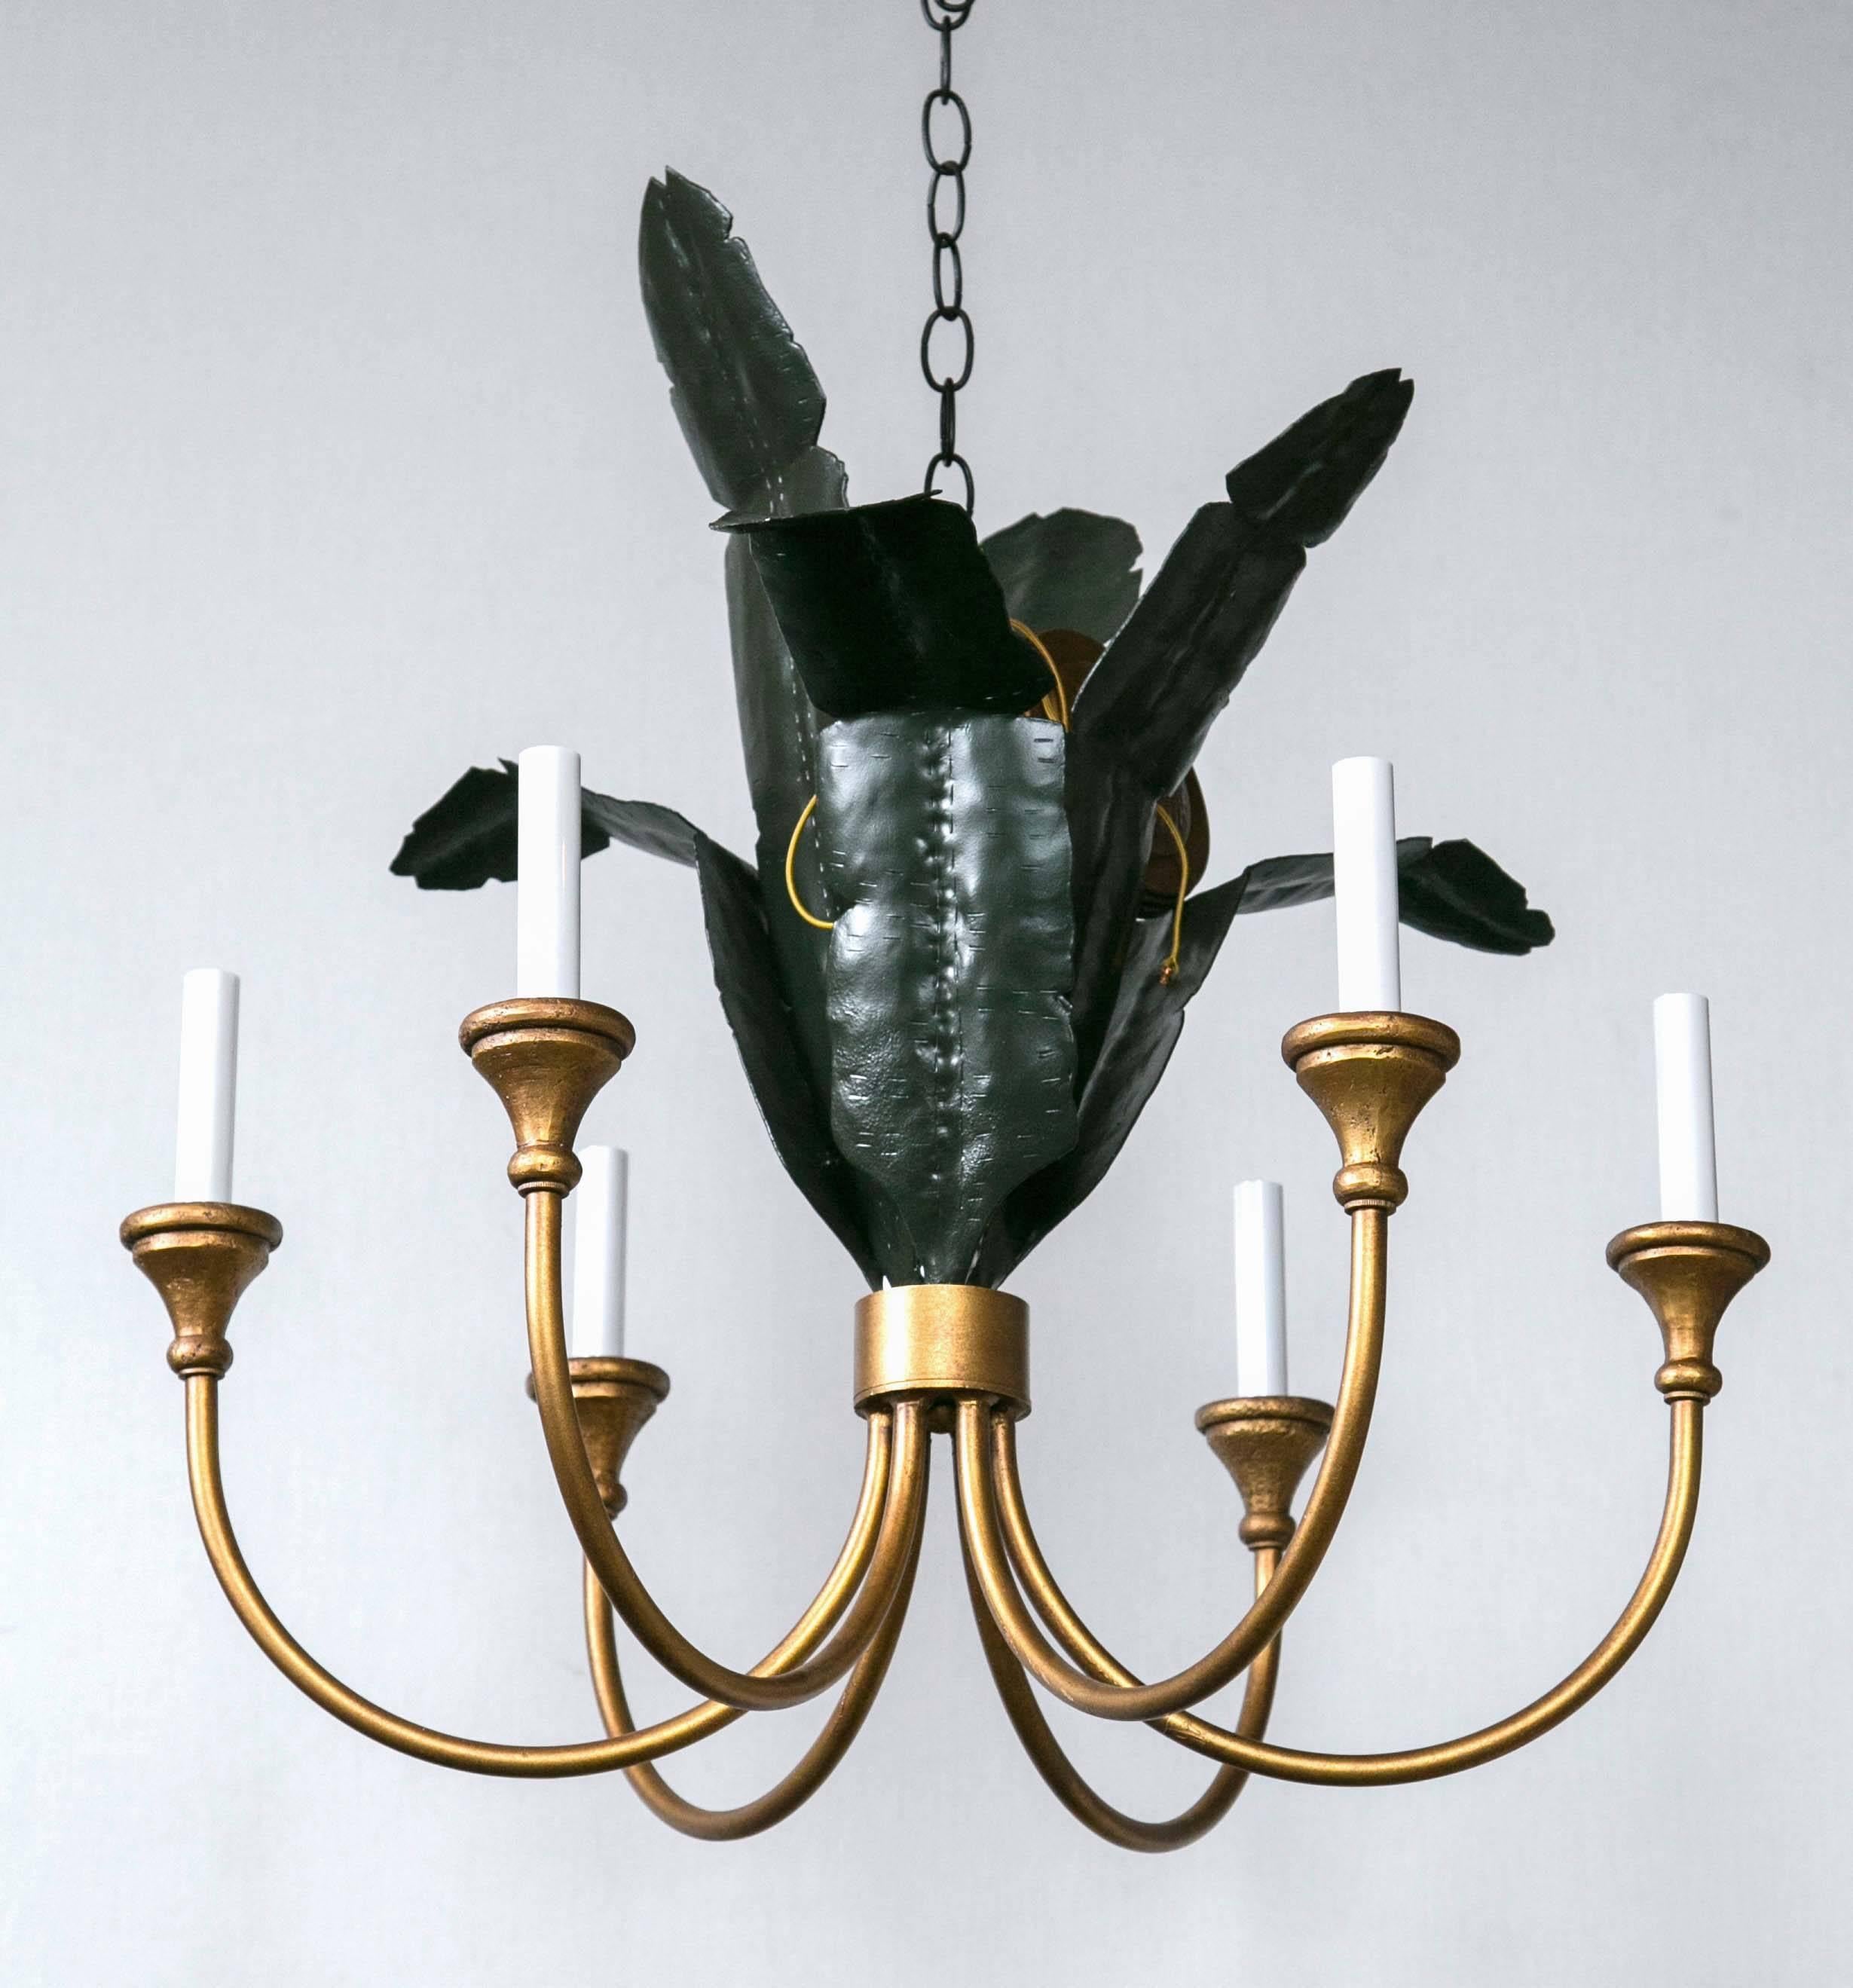 With original chain and canopy. Six-light candelabra bulbs. New old stock.
 